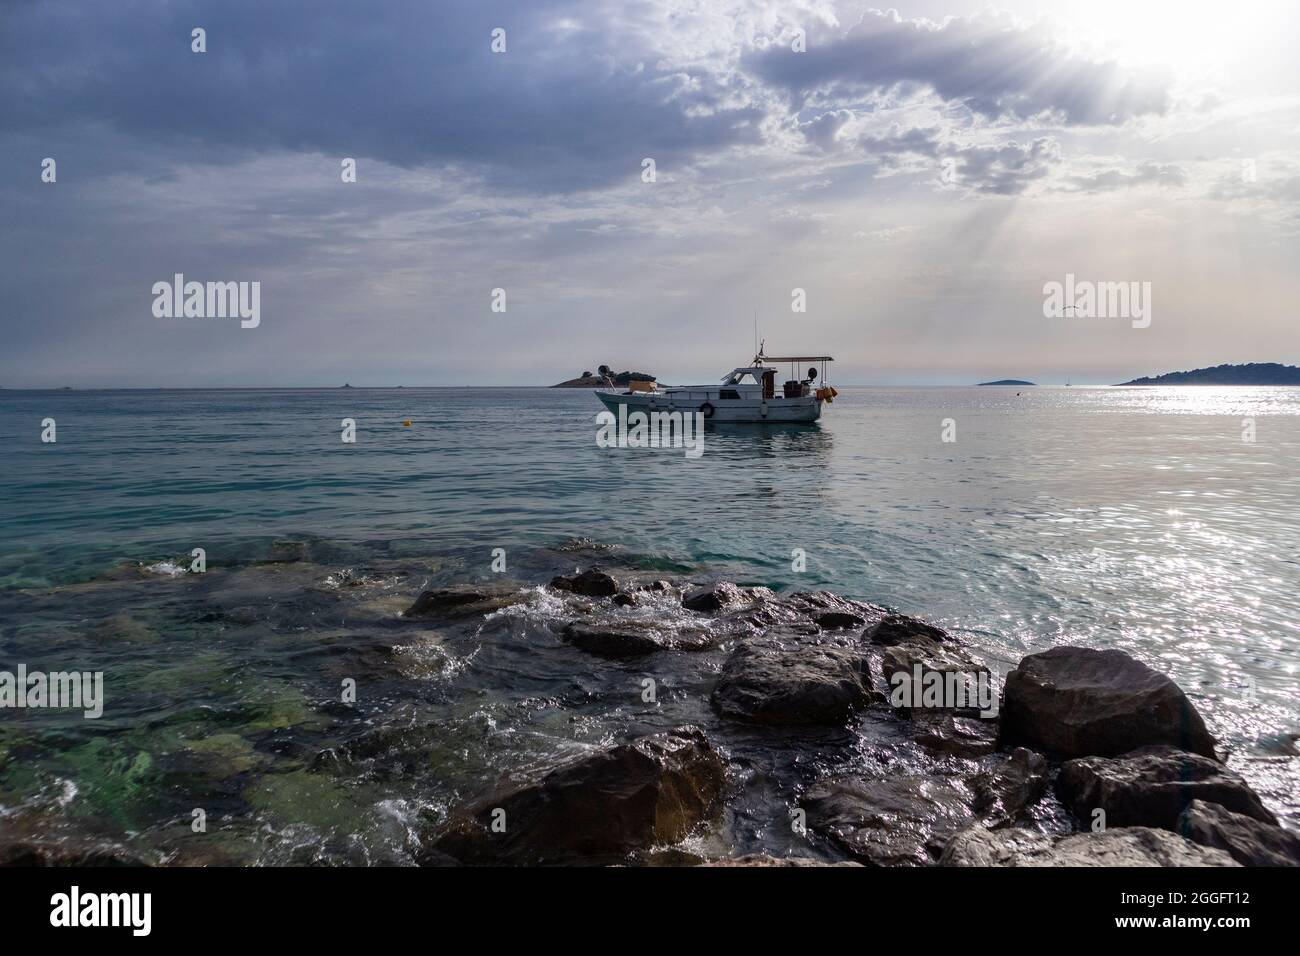 Fshing boat anchored at the open Adriatic sea with distant islands in the distance off the coast of Rogoznica, Croatia Stock Photo